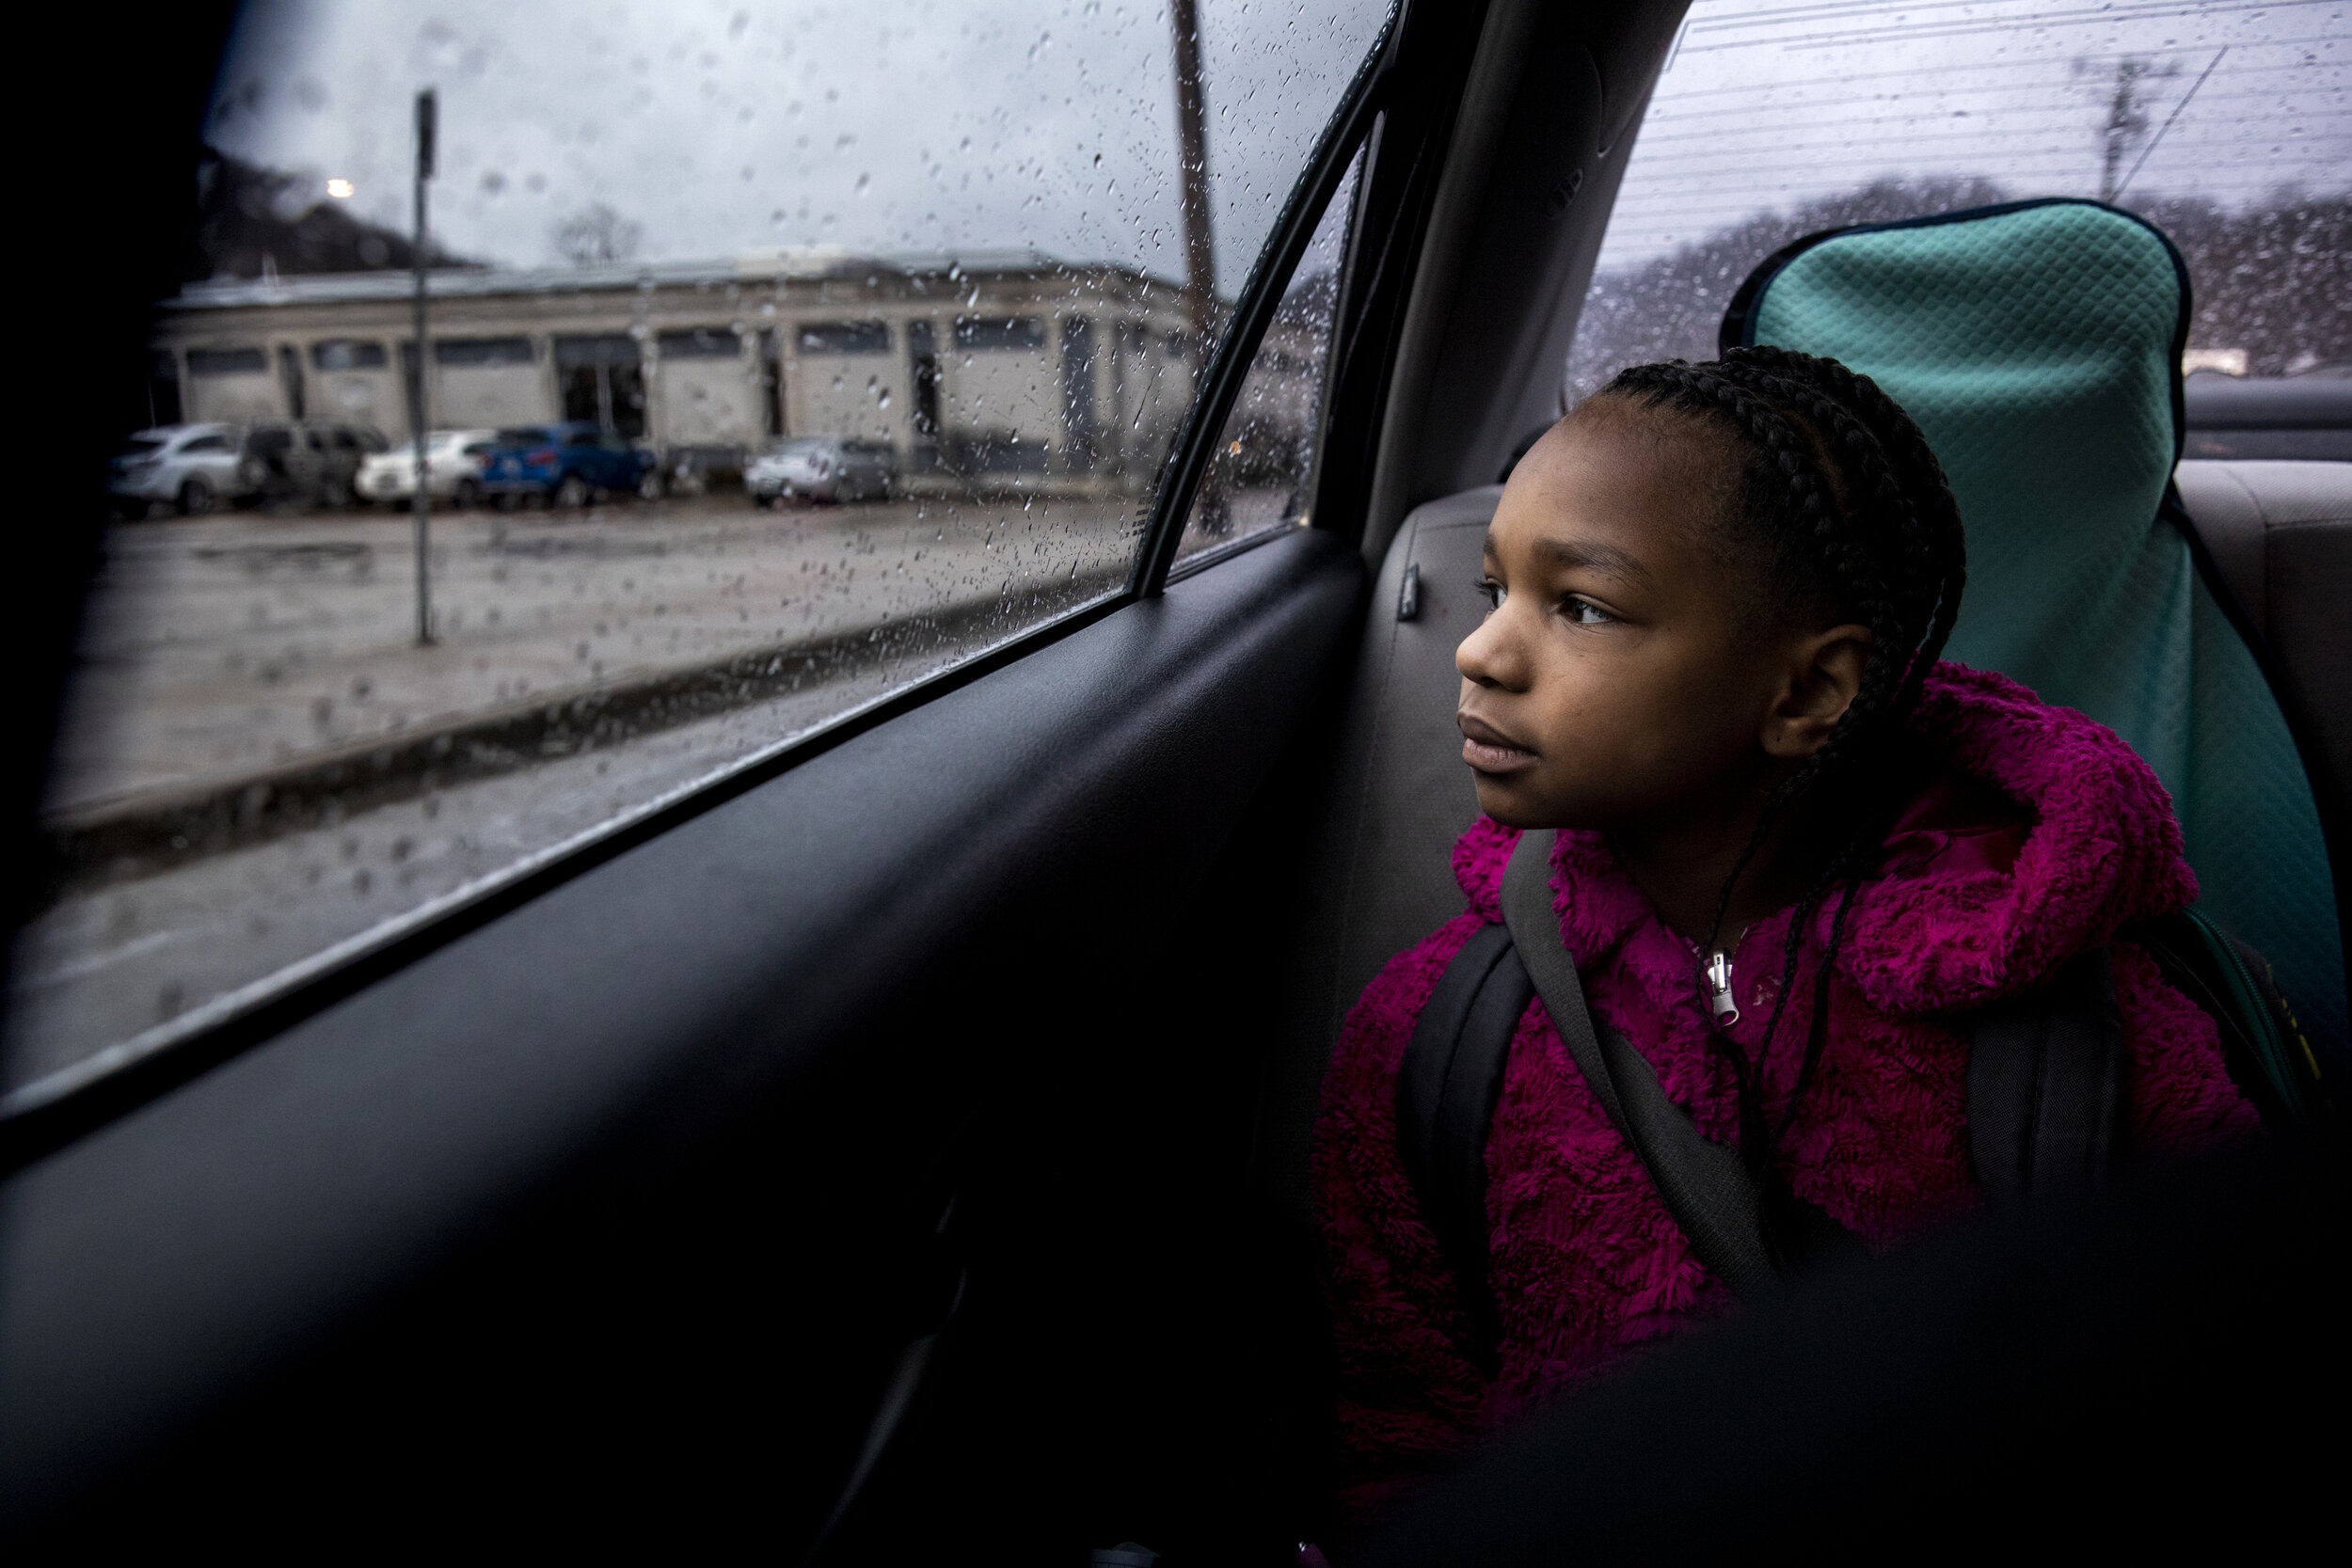  Amariyonna, 9, looks out the window as her mom drives her and her sisters to school in Northside. 